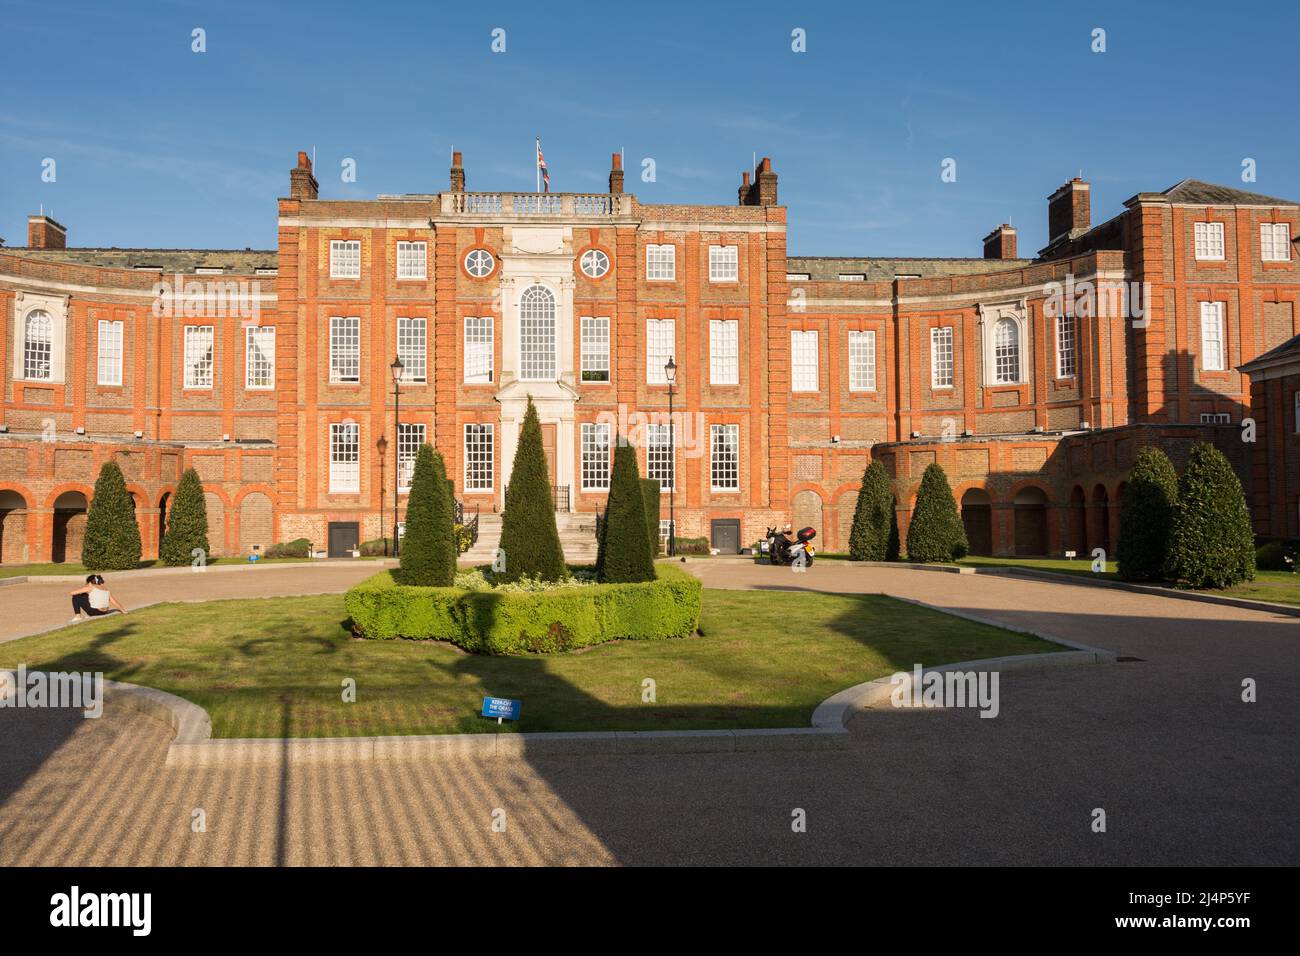 Roehampton House, part of Queen Mary’s Place, Roehampton Lane, Roehampton, London, England, UK Stock Photo